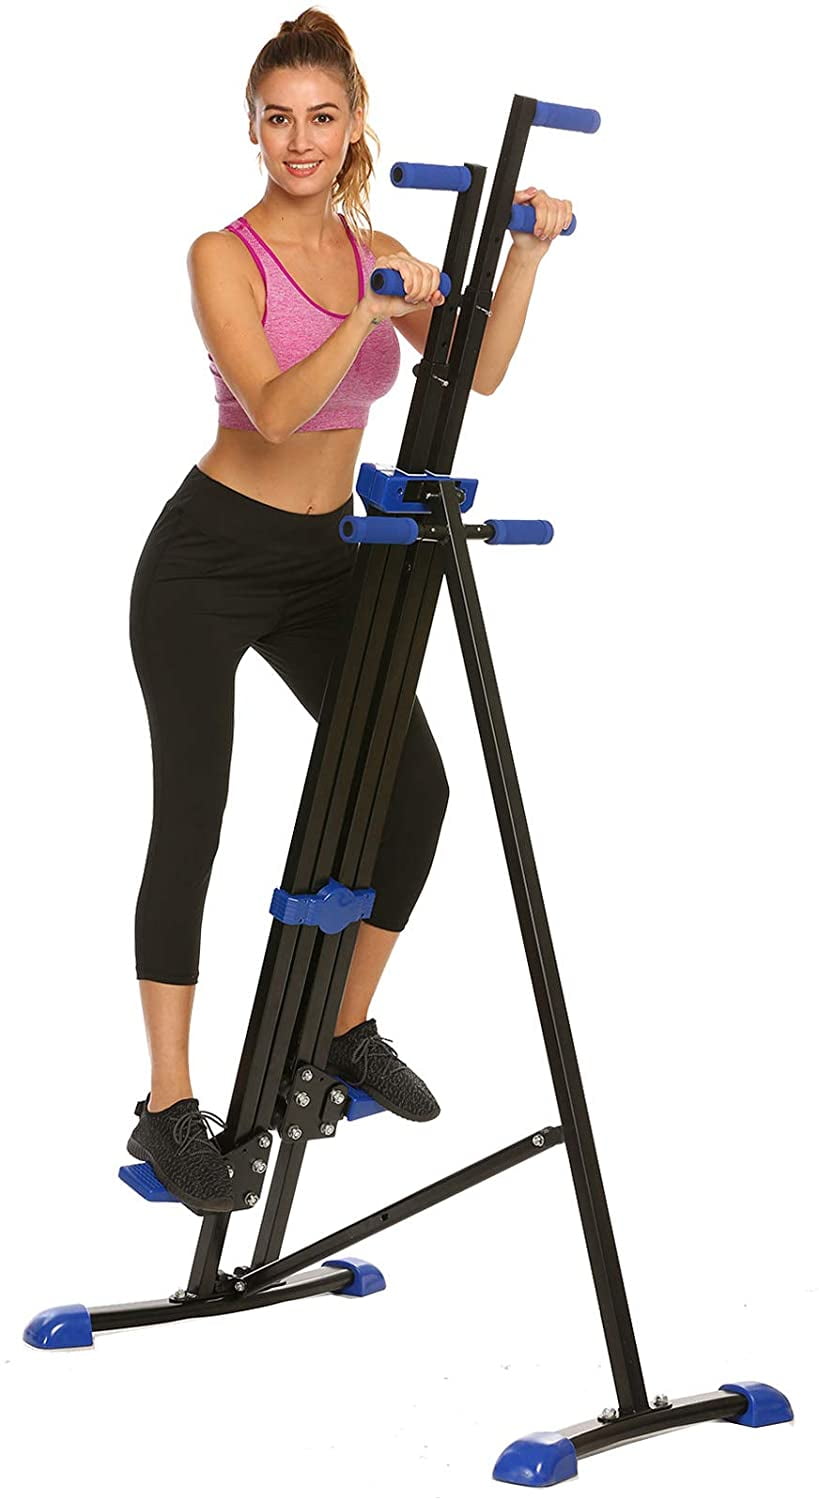 EBTOOLS Vertical Climber Exercise Machine Step Machines Professional Cardio Training Stair Stepper for Fitness Aerobic Exercise in Home Gym Office 